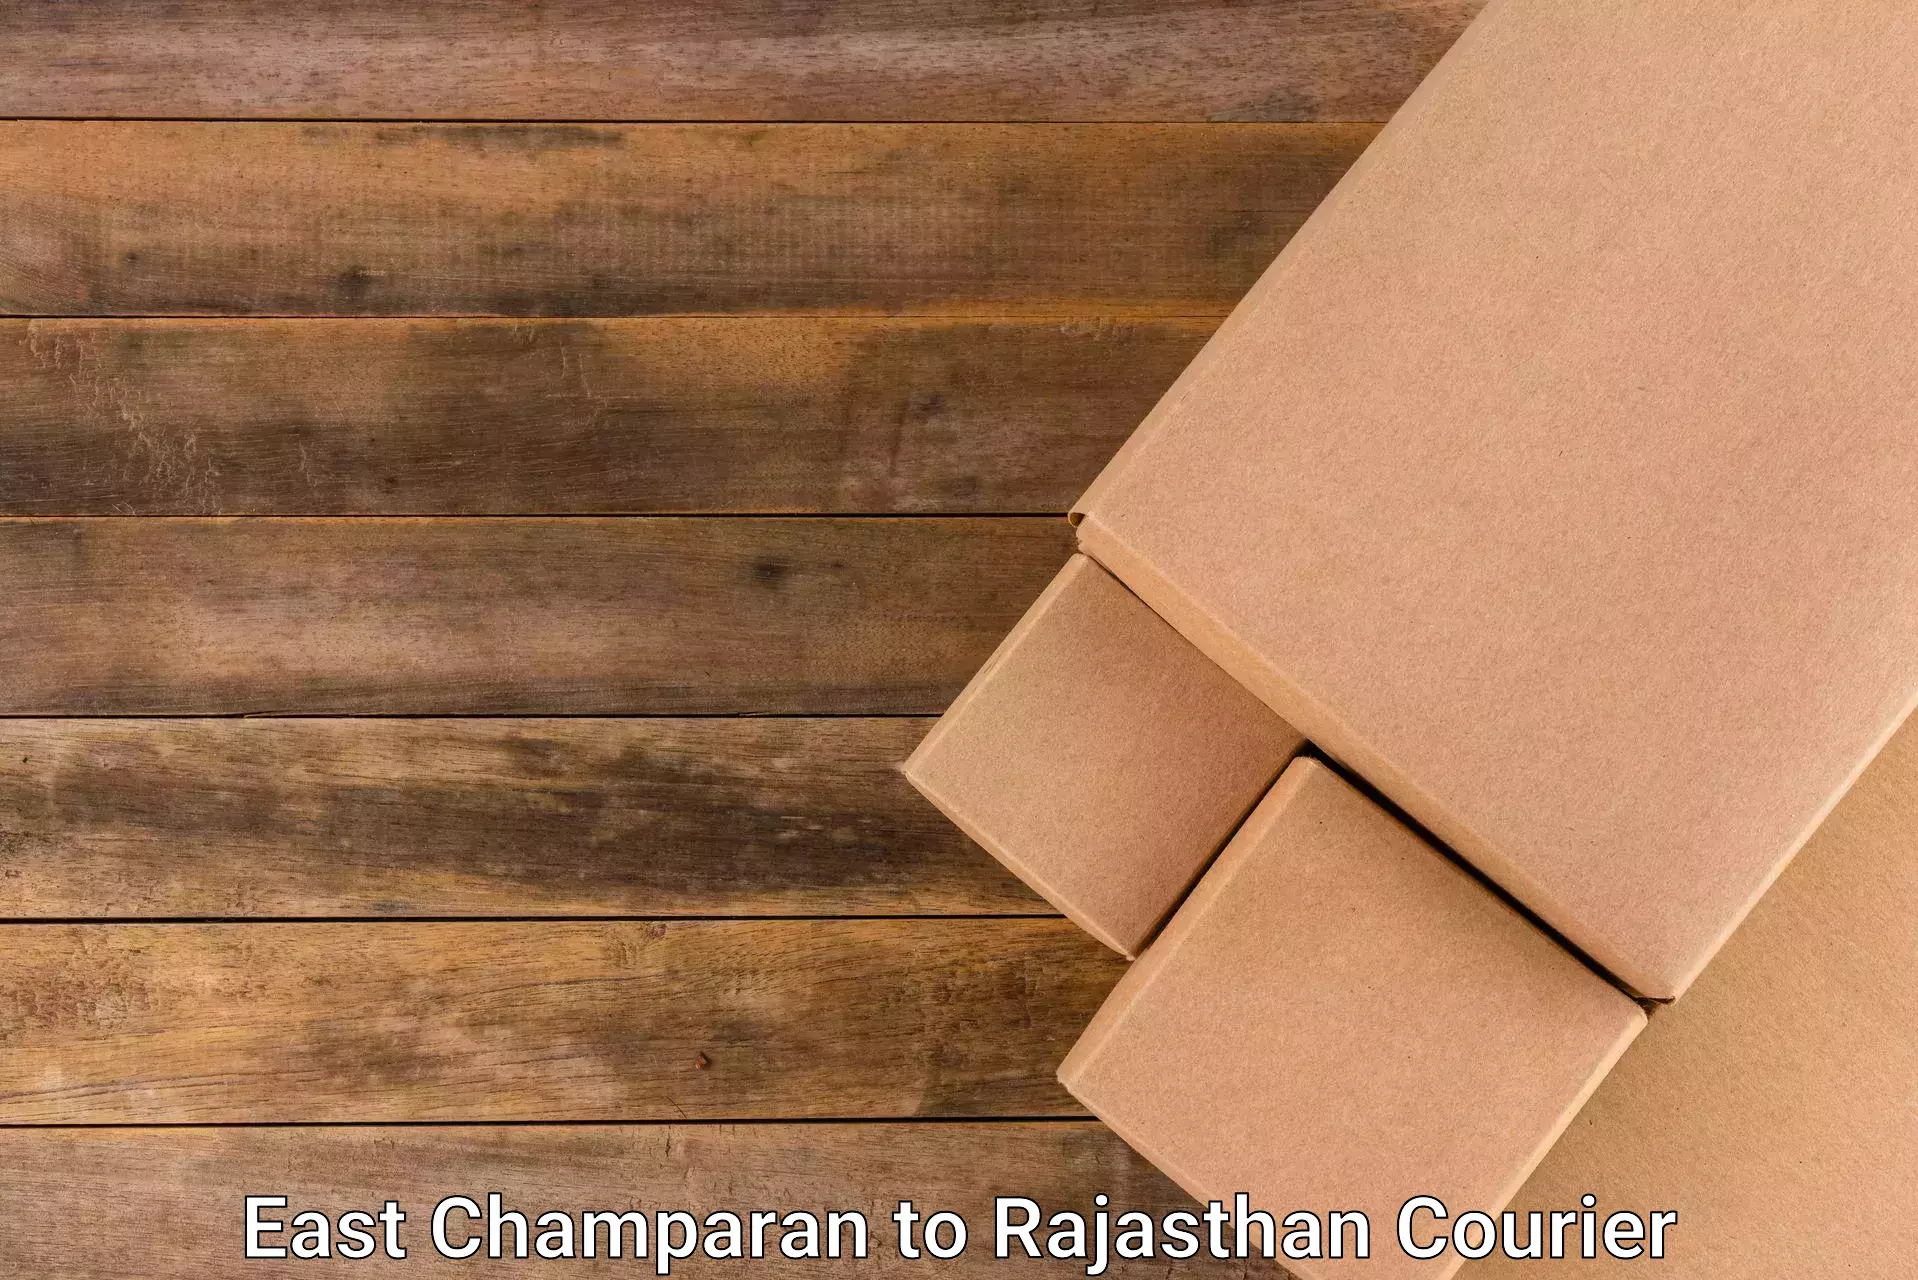 Express package transport East Champaran to Dhorimana